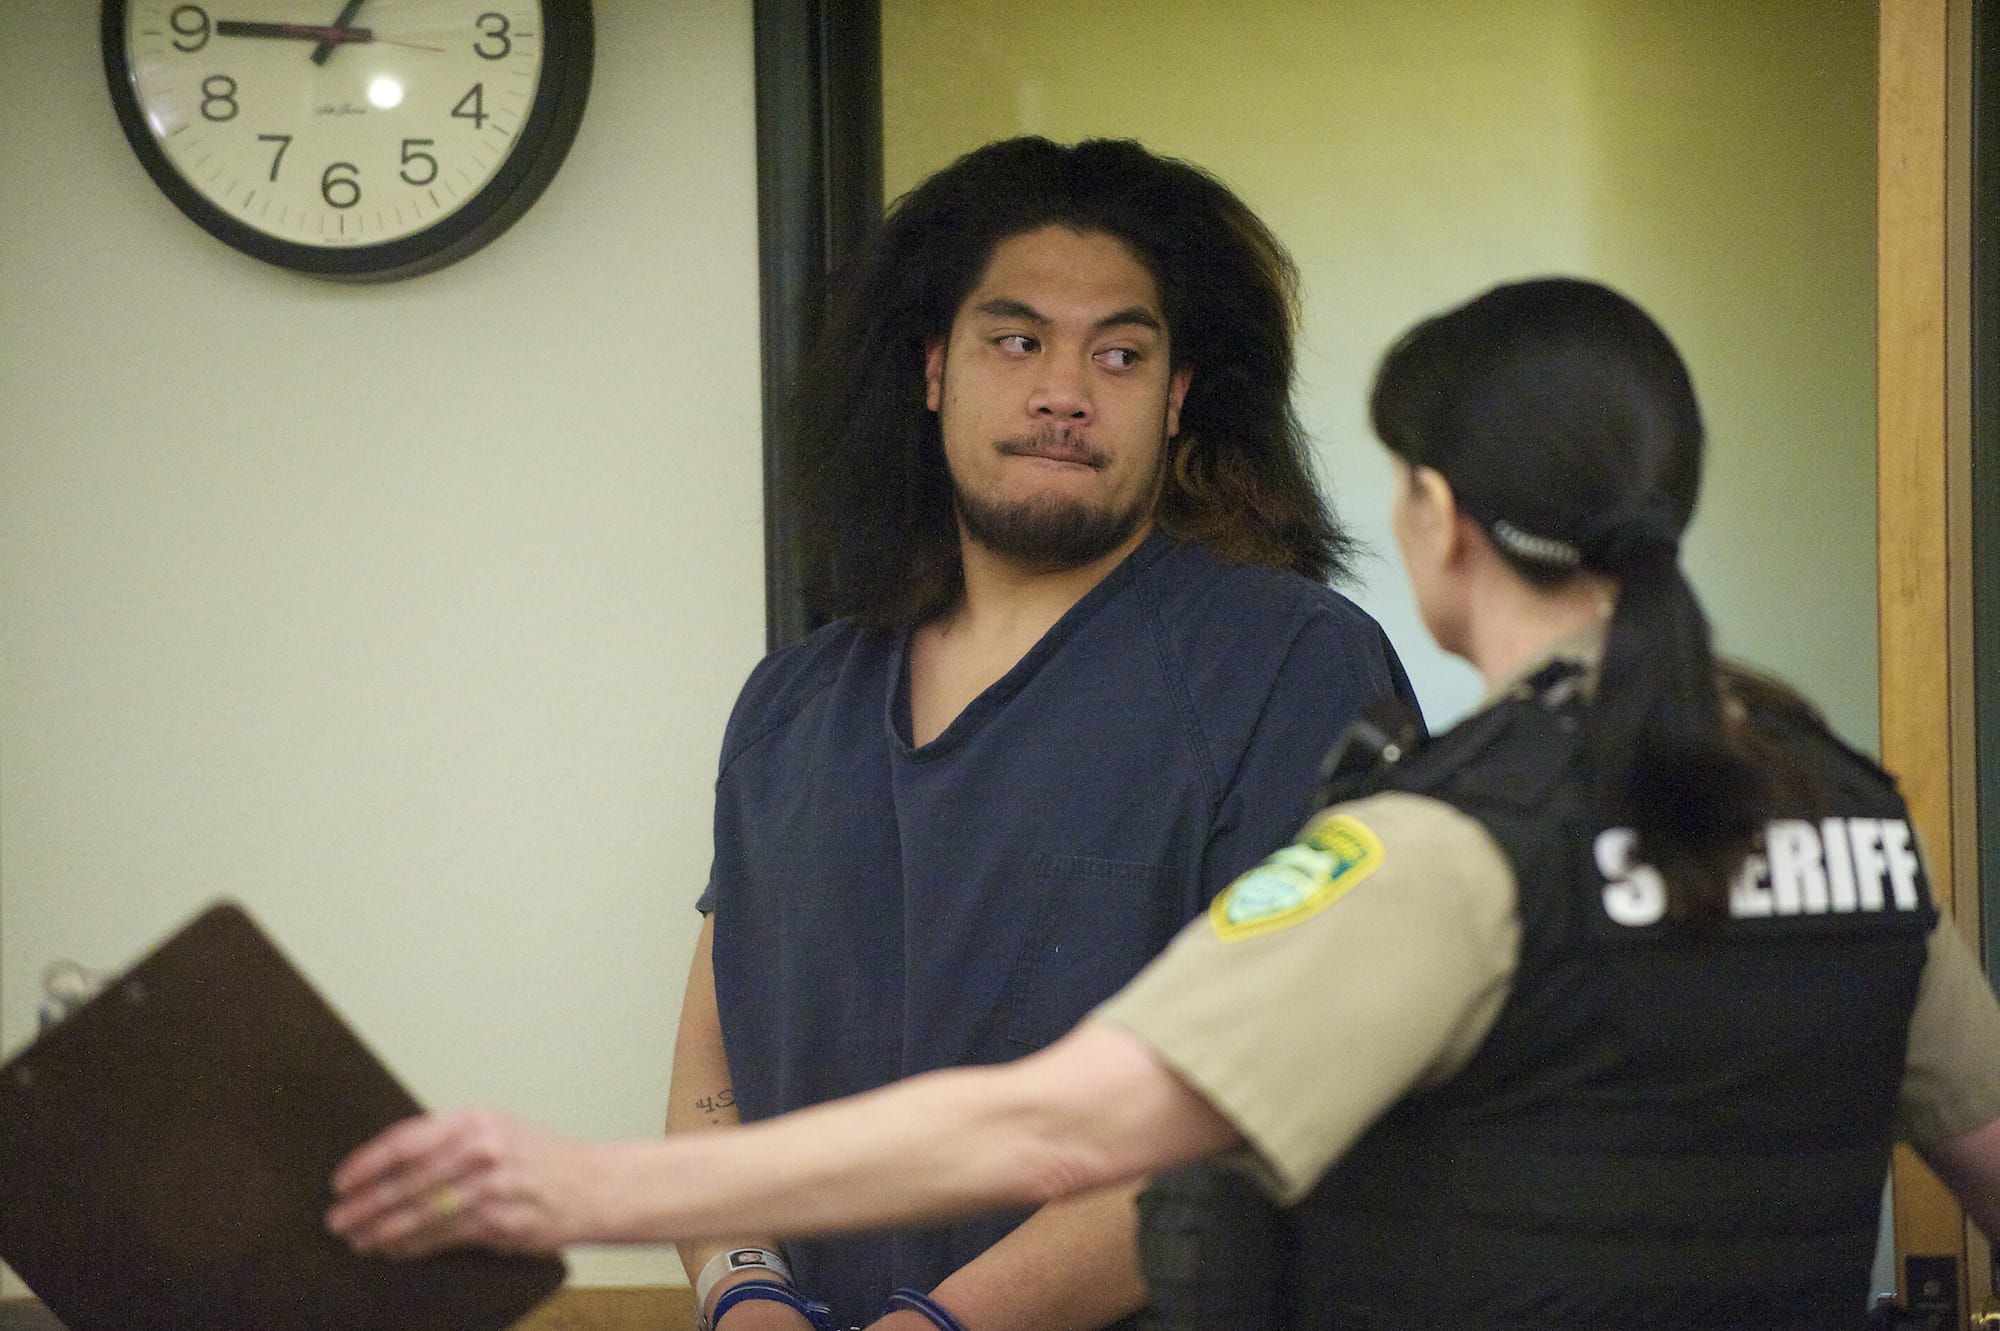 John Kalamafoni, 22, appears today in Clark County Superior Court on suspicion of stealing Native American art, worth $300,000, from an elderly Vancouver woman with dementia.